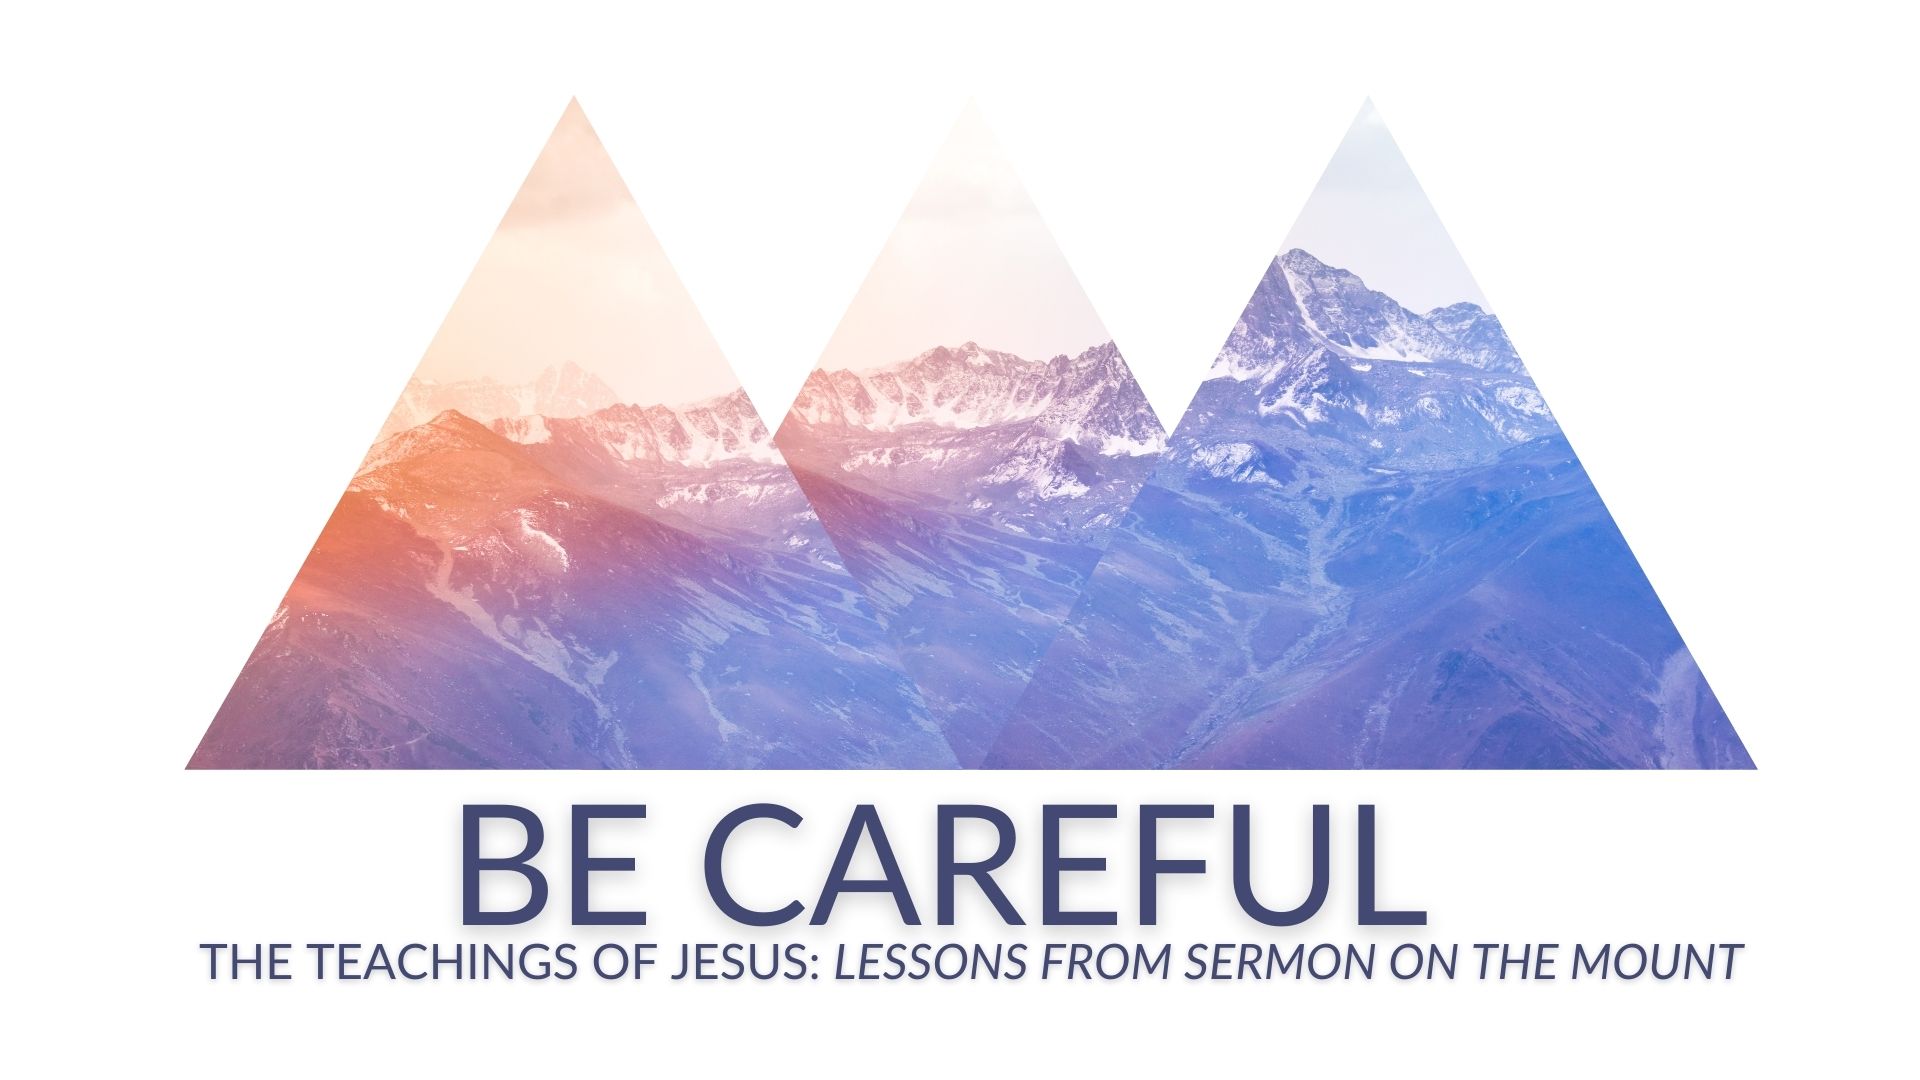 BE CAREFUL - The Teachings of Jesus: Lessons from the Sermon on the Mount